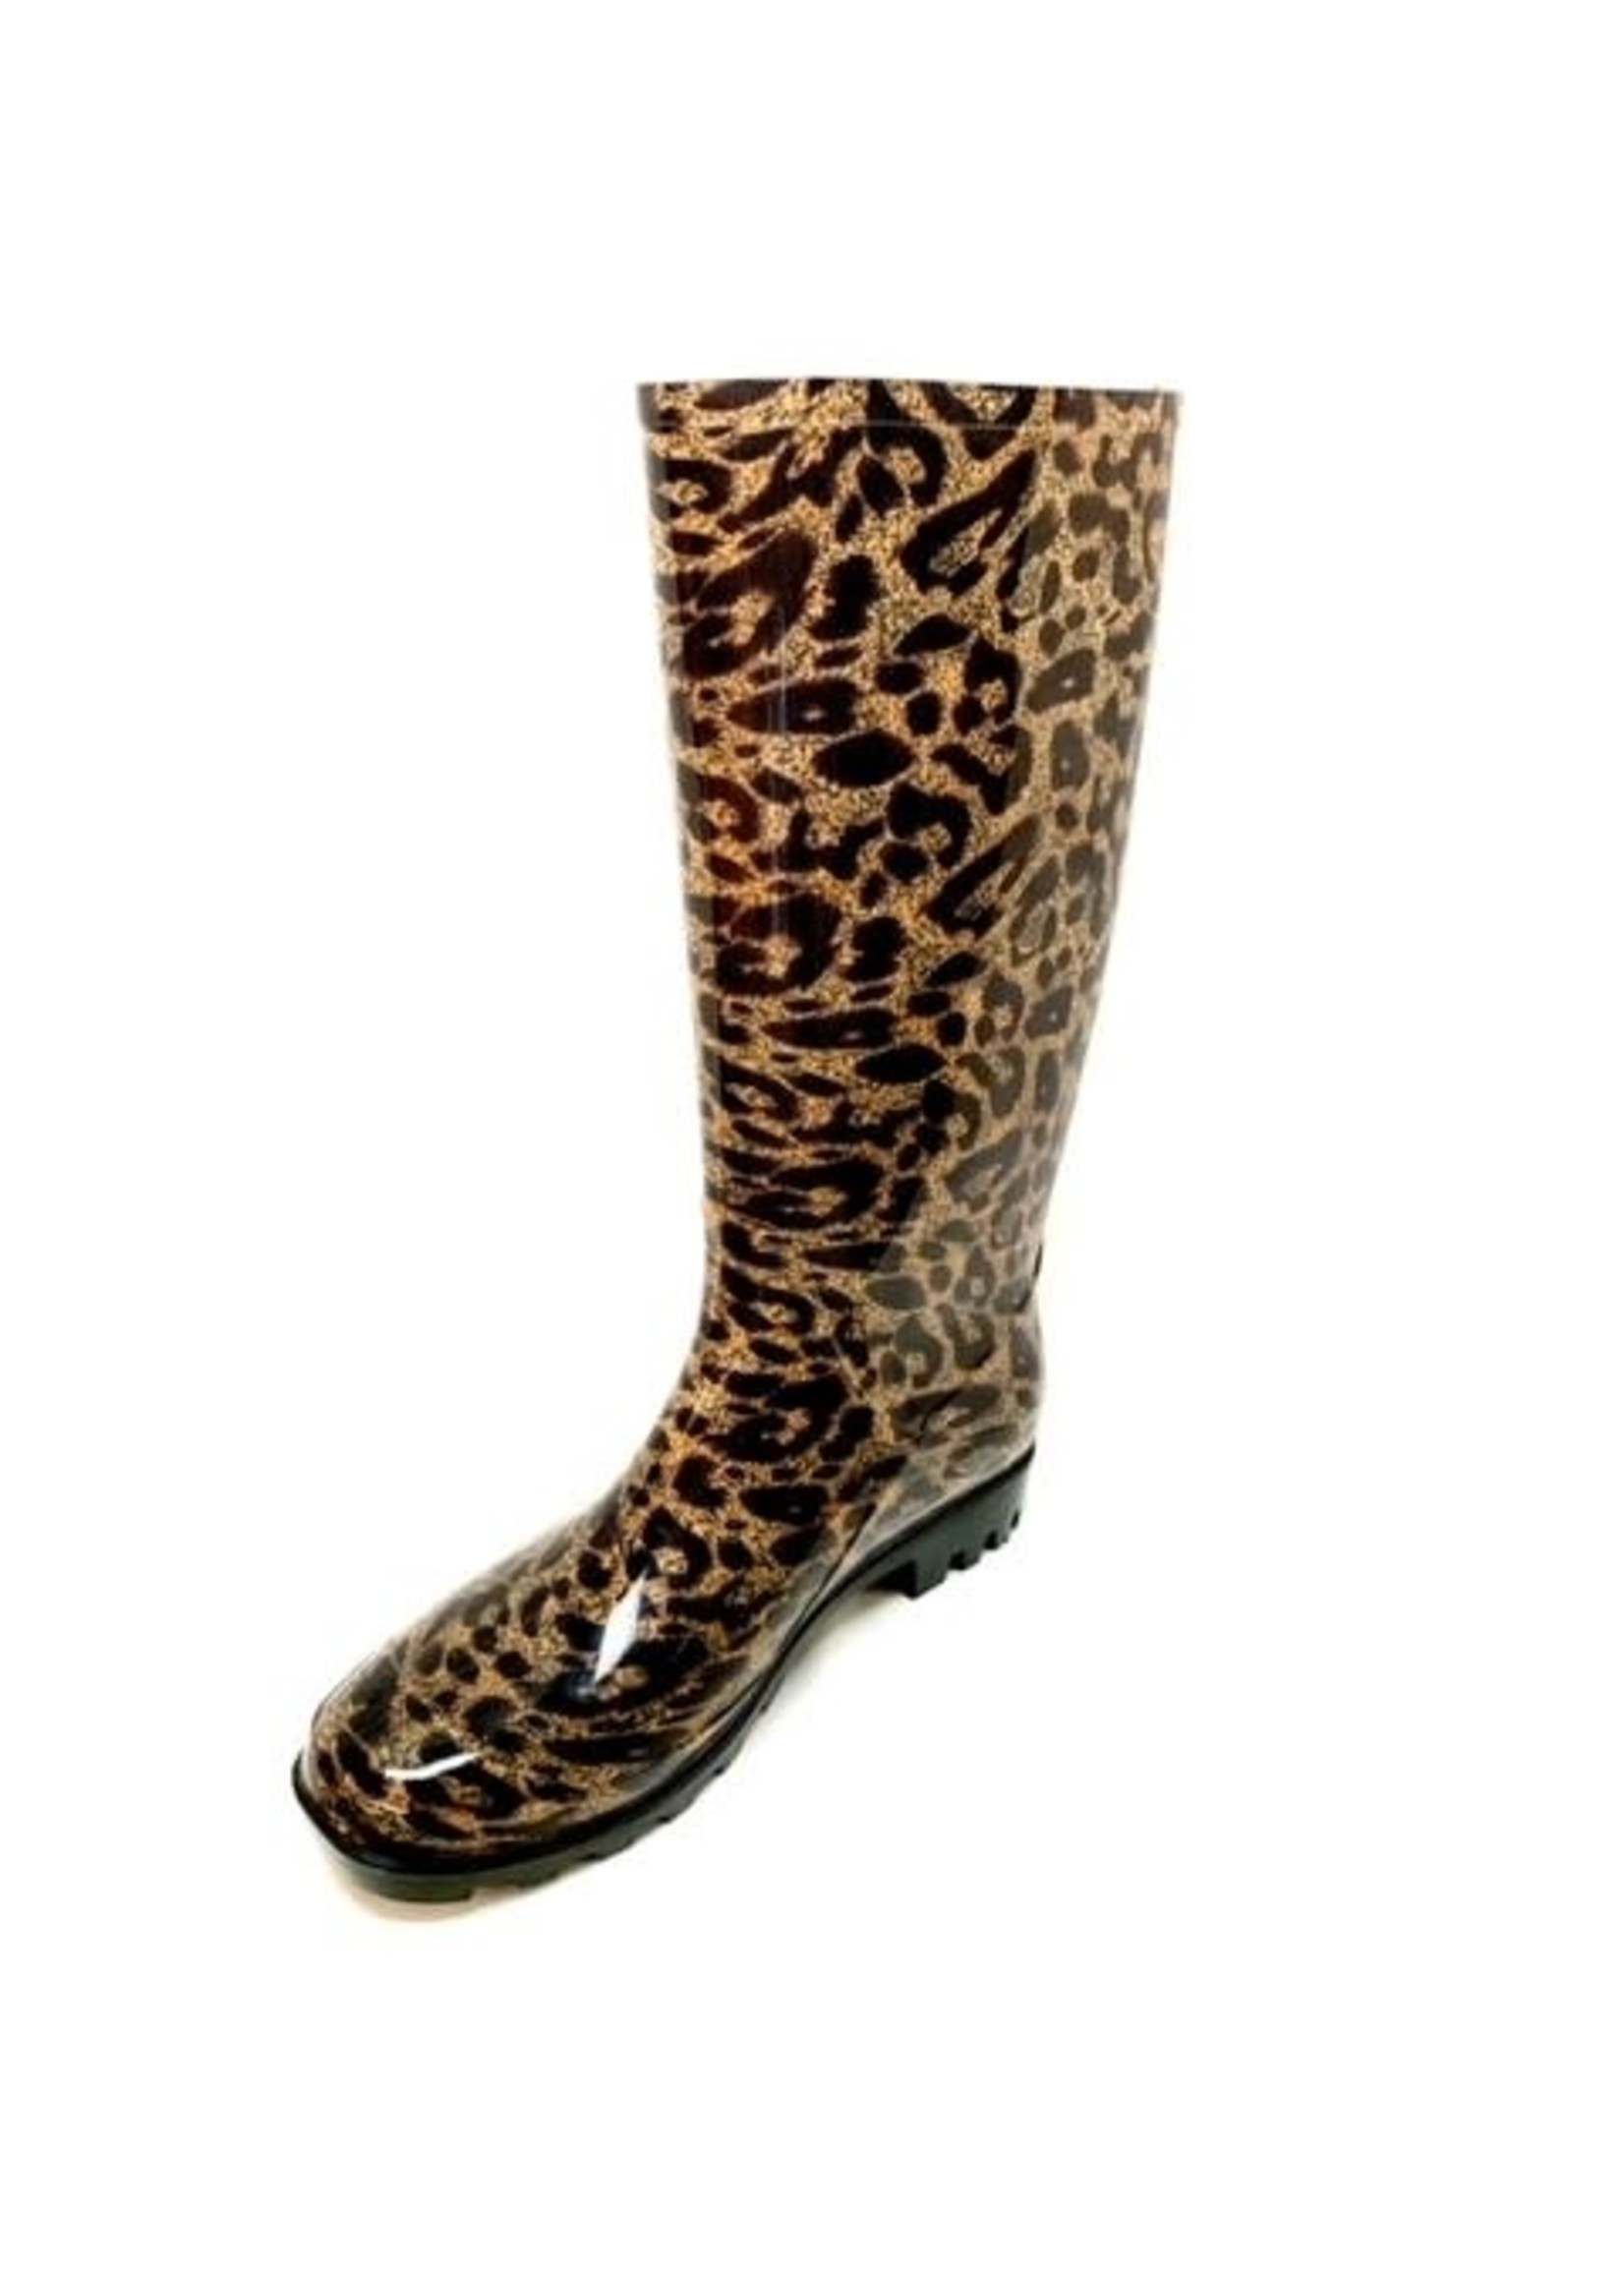 Soft Comfort Rubber Boots two styles